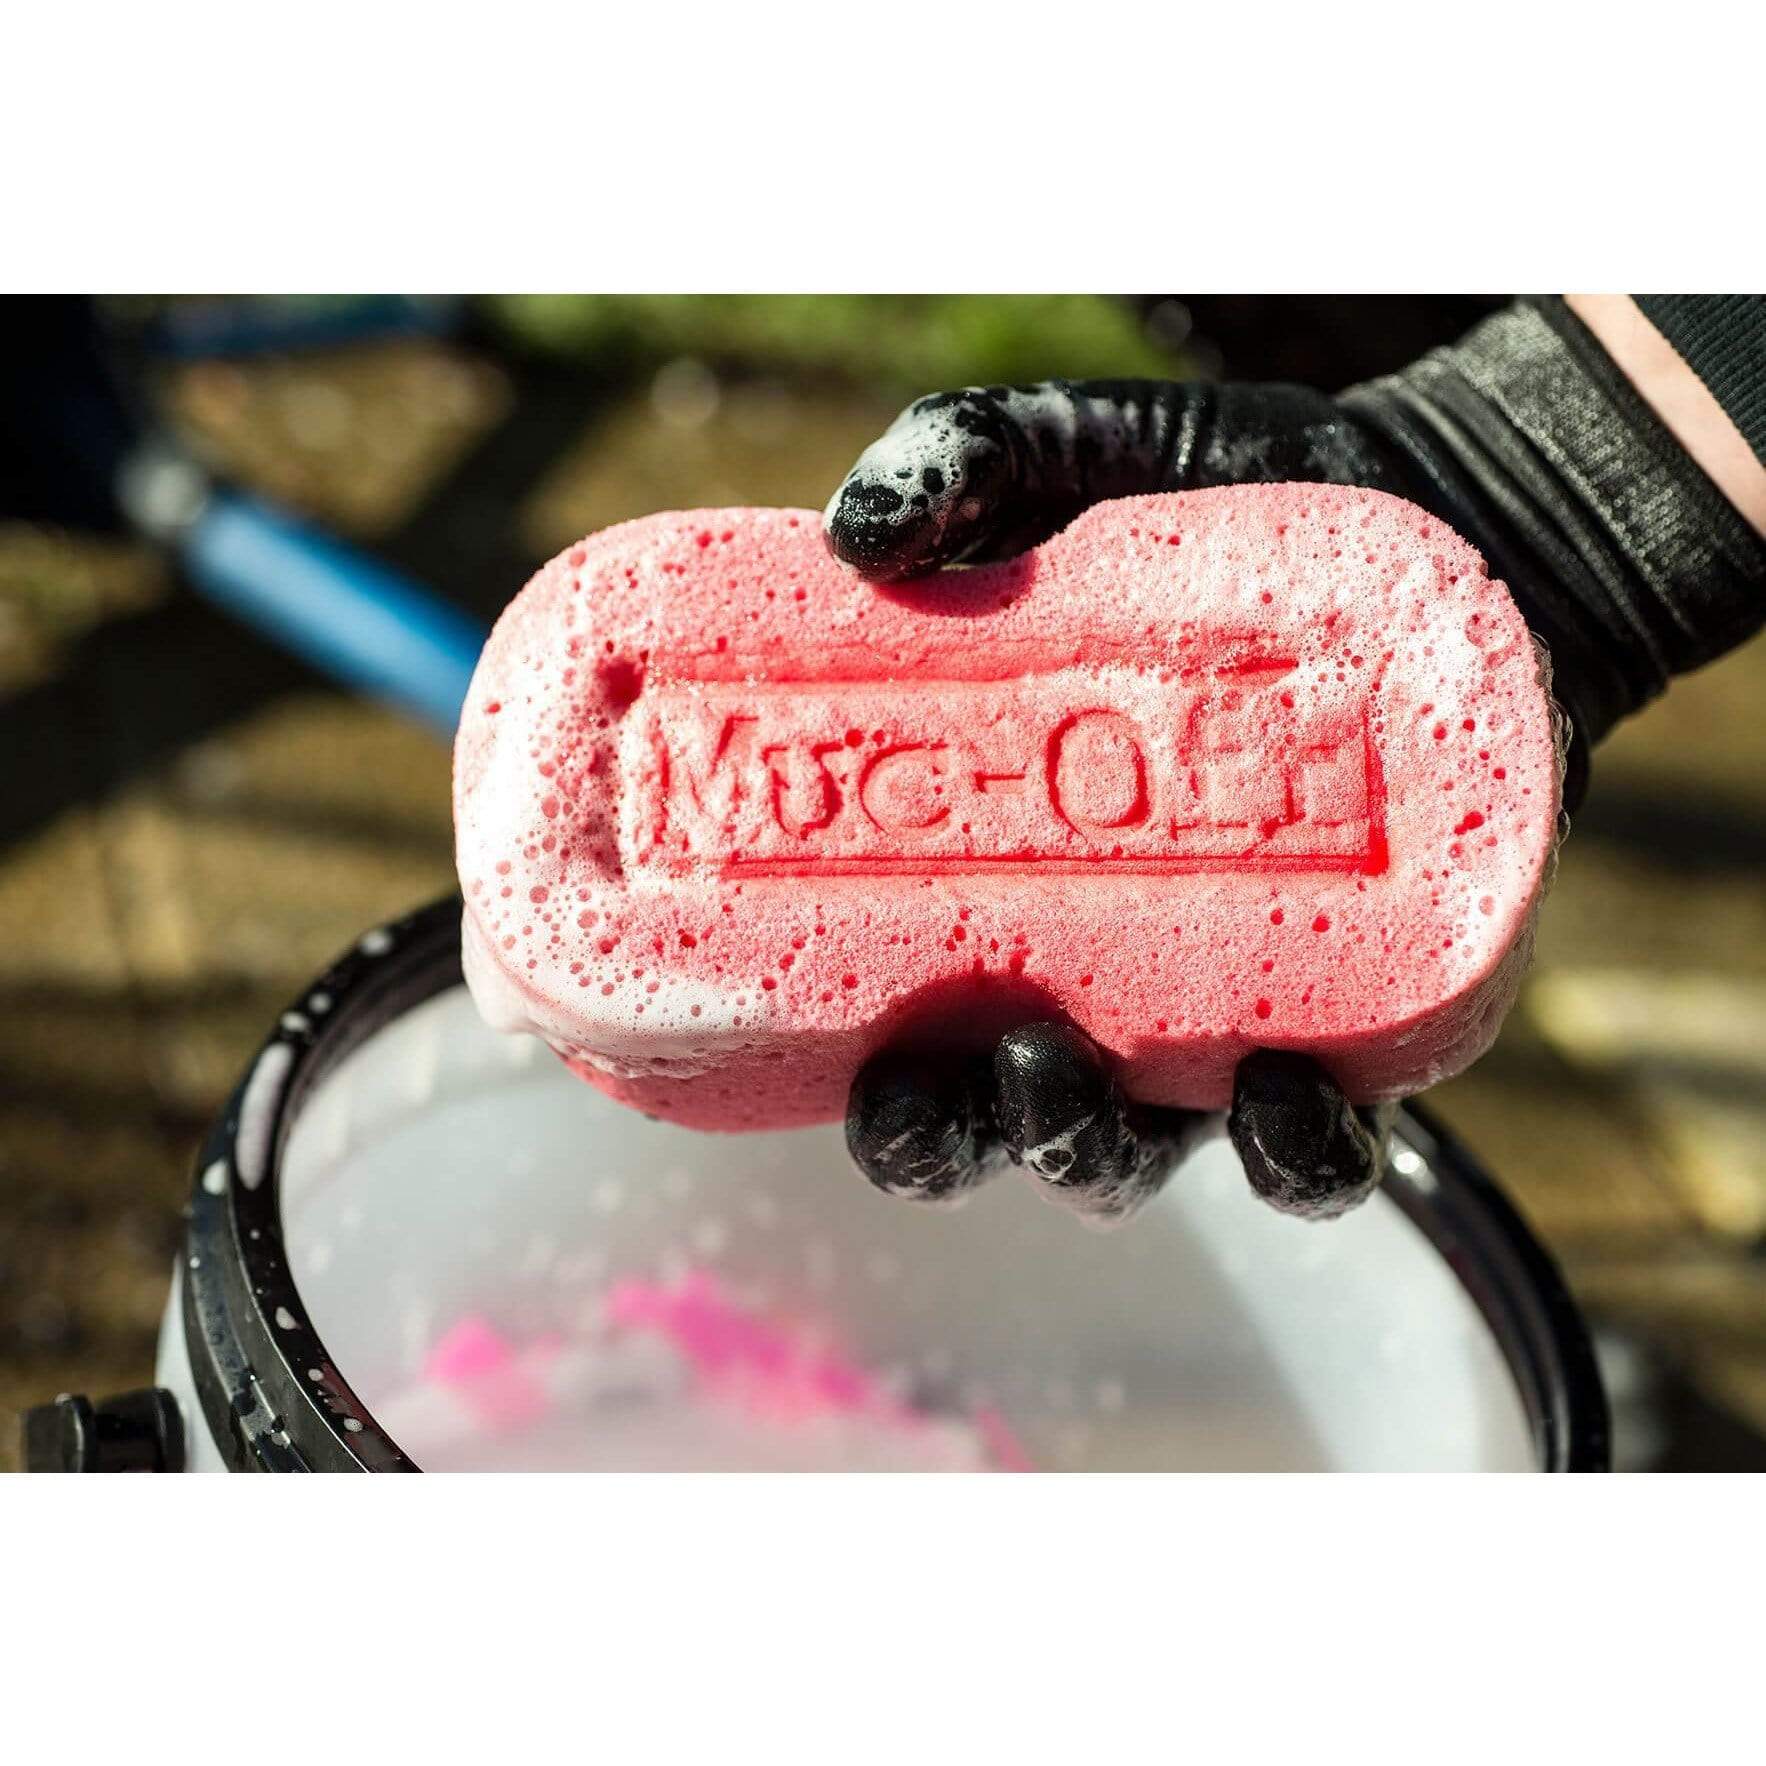 Muc-Off Bicycle Duo Pack w/Sponge - The Spoke Easy